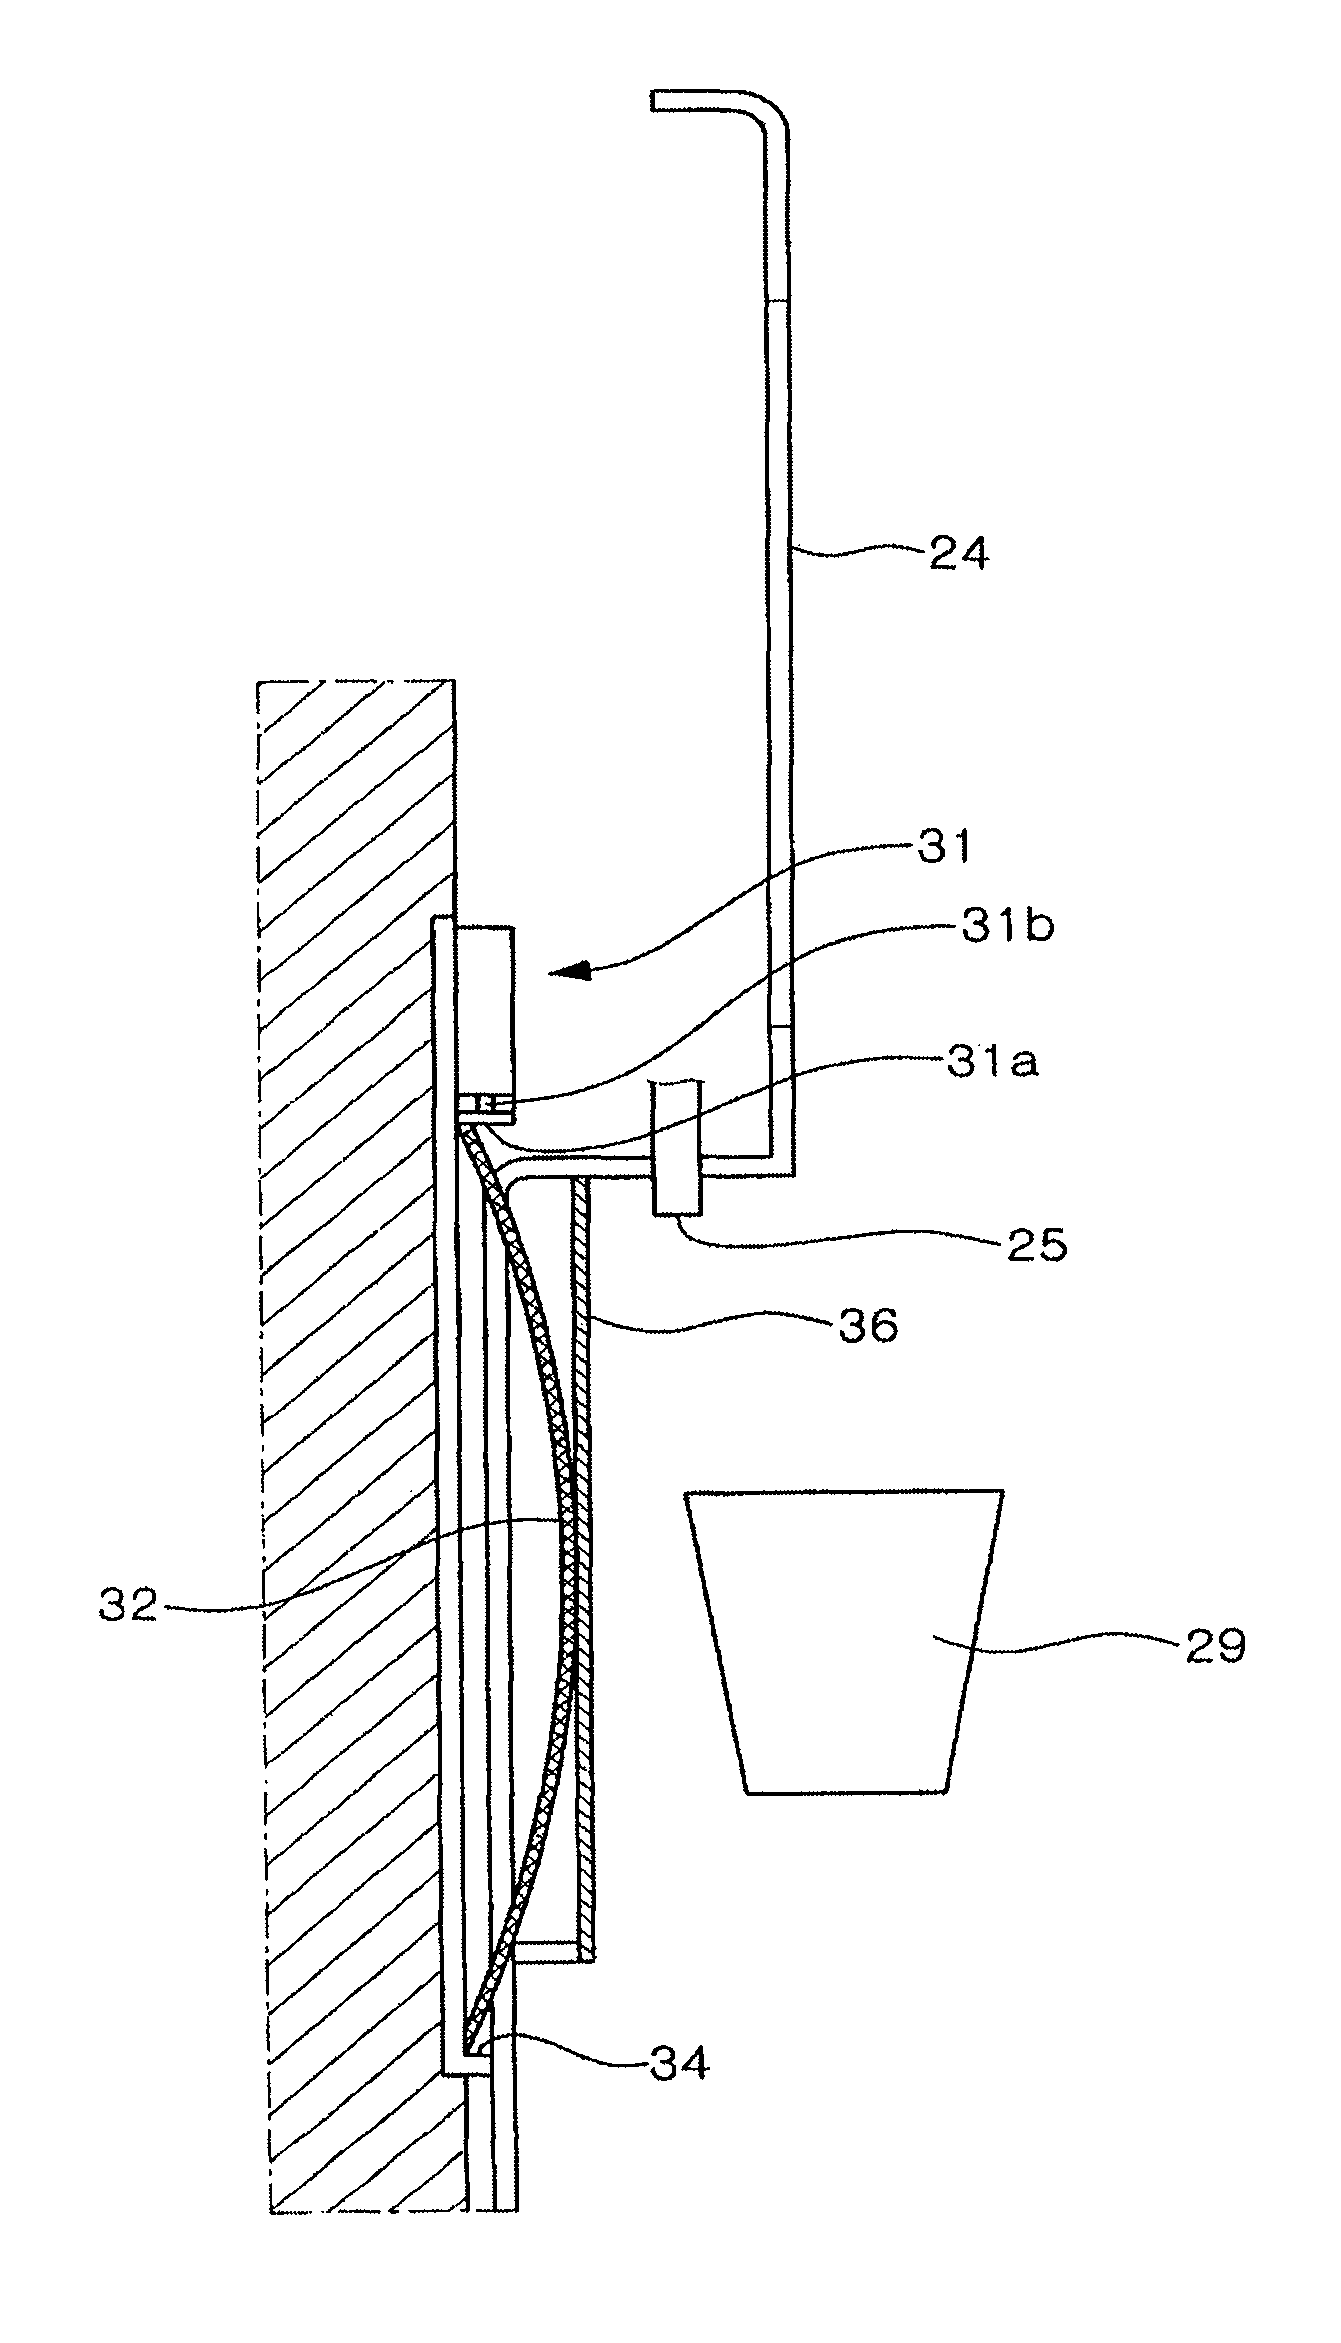 Switching apparatus of dispenser for refrigerator